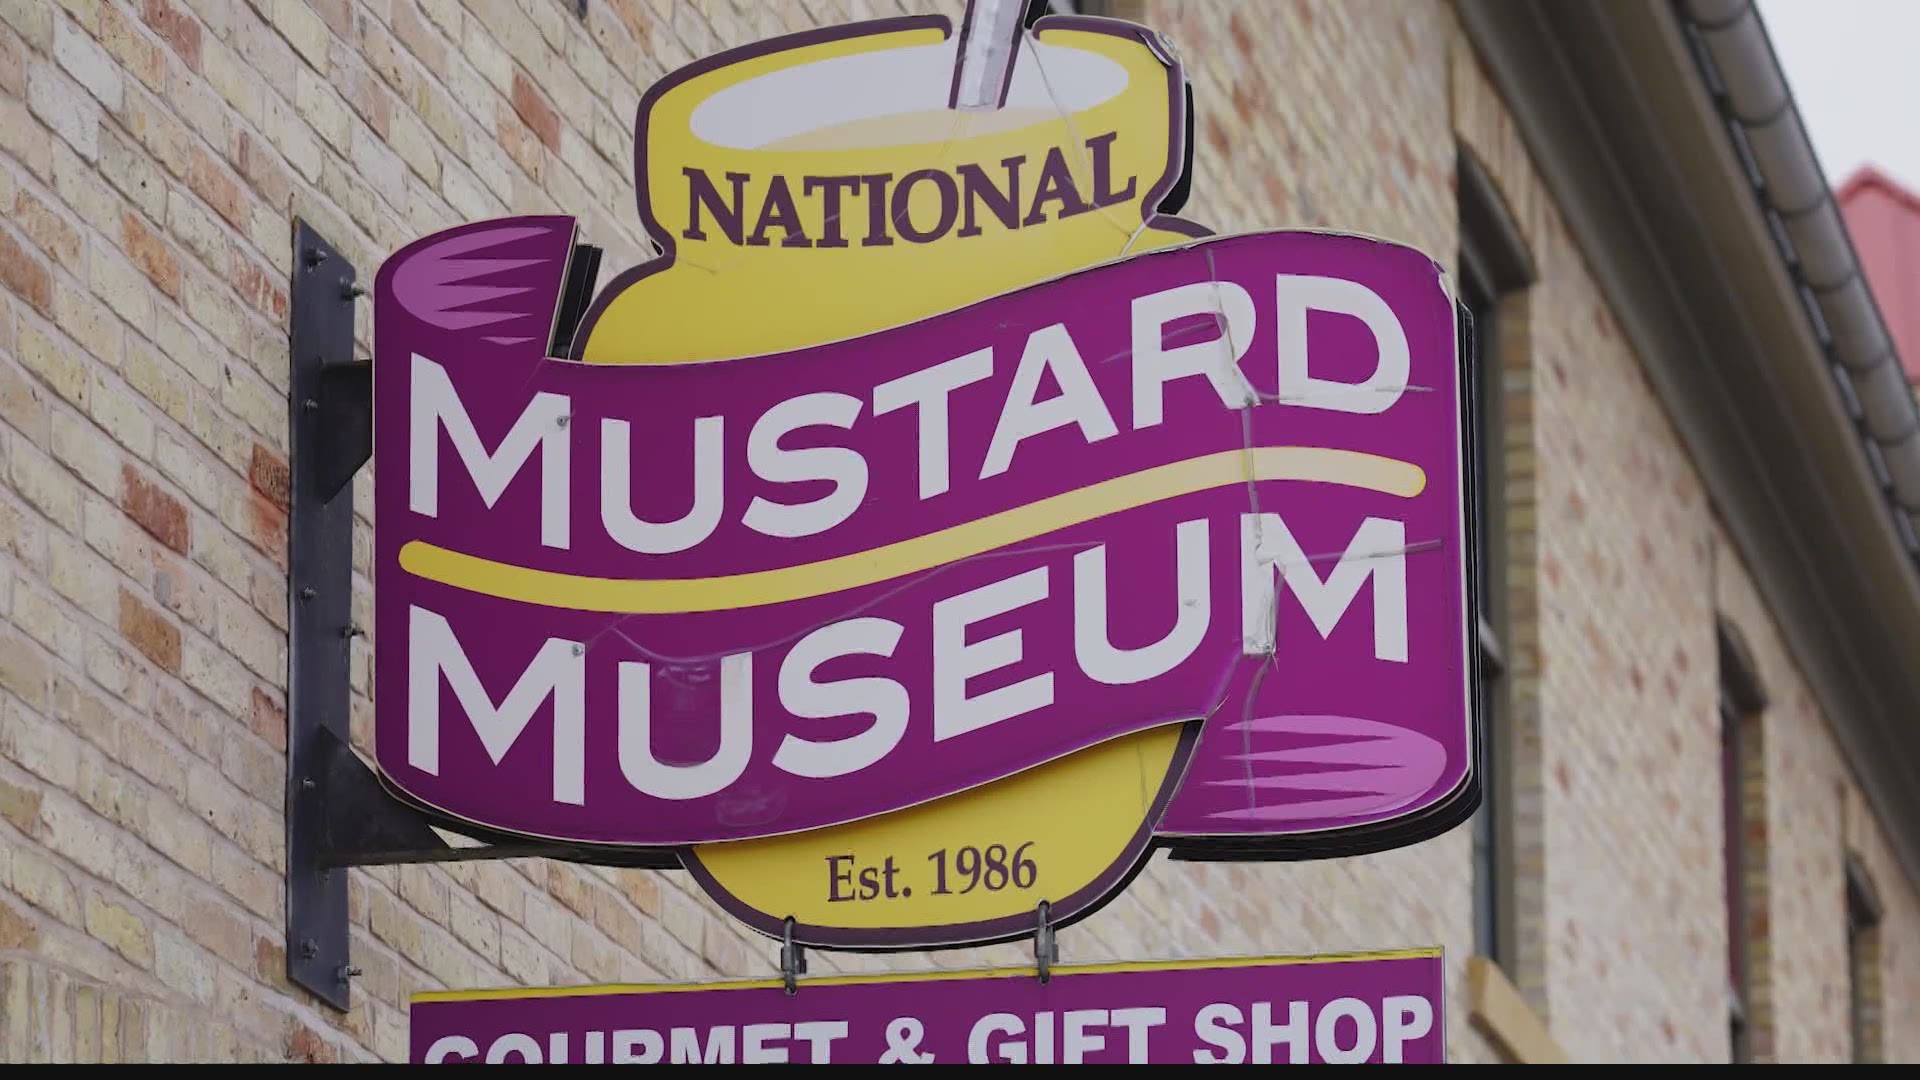 The National Mustard Museum in Middleton, Wisconsin, holds the world's largest collection of mustard and mustard memorabilia.